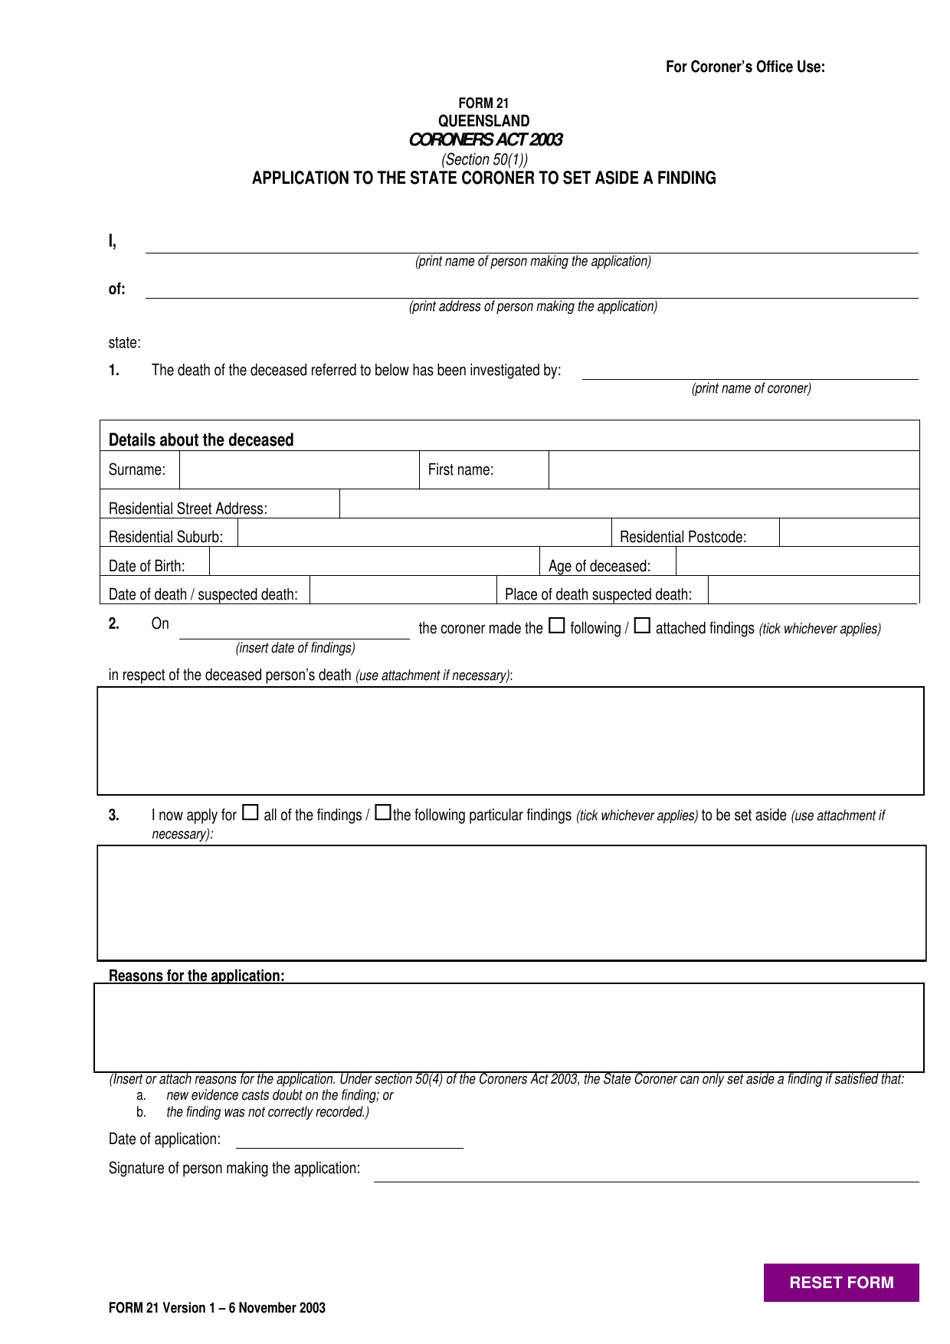 Form 21 Application to the State Coroner to Set Aside a Finding - Queensland, Australia, Page 1